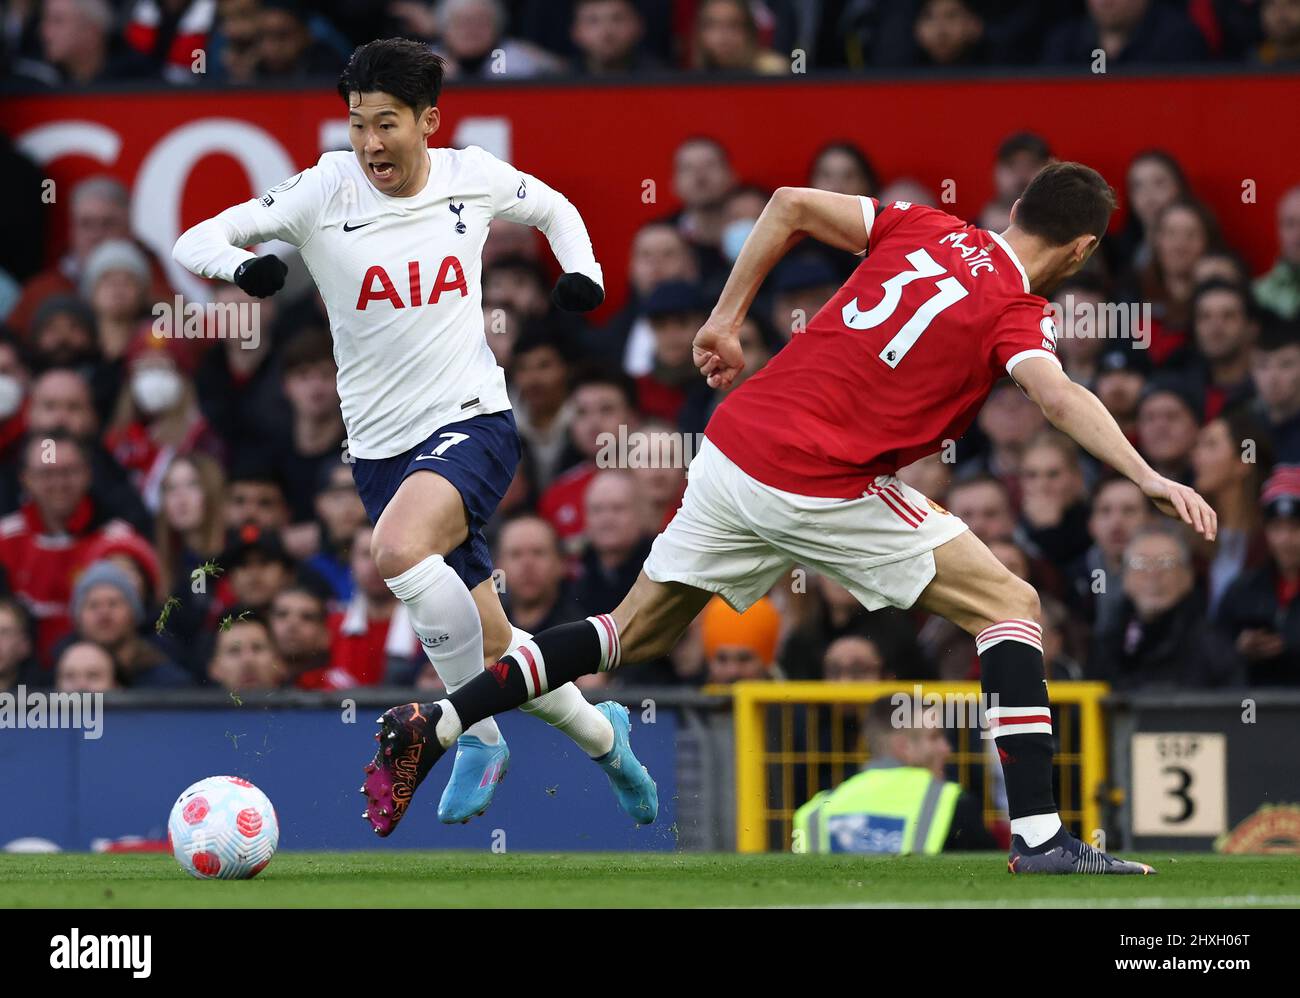 Manchester, England, 12th March 2022.  Nemanja Matic of Manchester United challenges Heung-Min Son of Tottenham during the Premier League match at Old Trafford, Manchester. Picture credit should read: Darren Staples / Sportimage Stock Photo